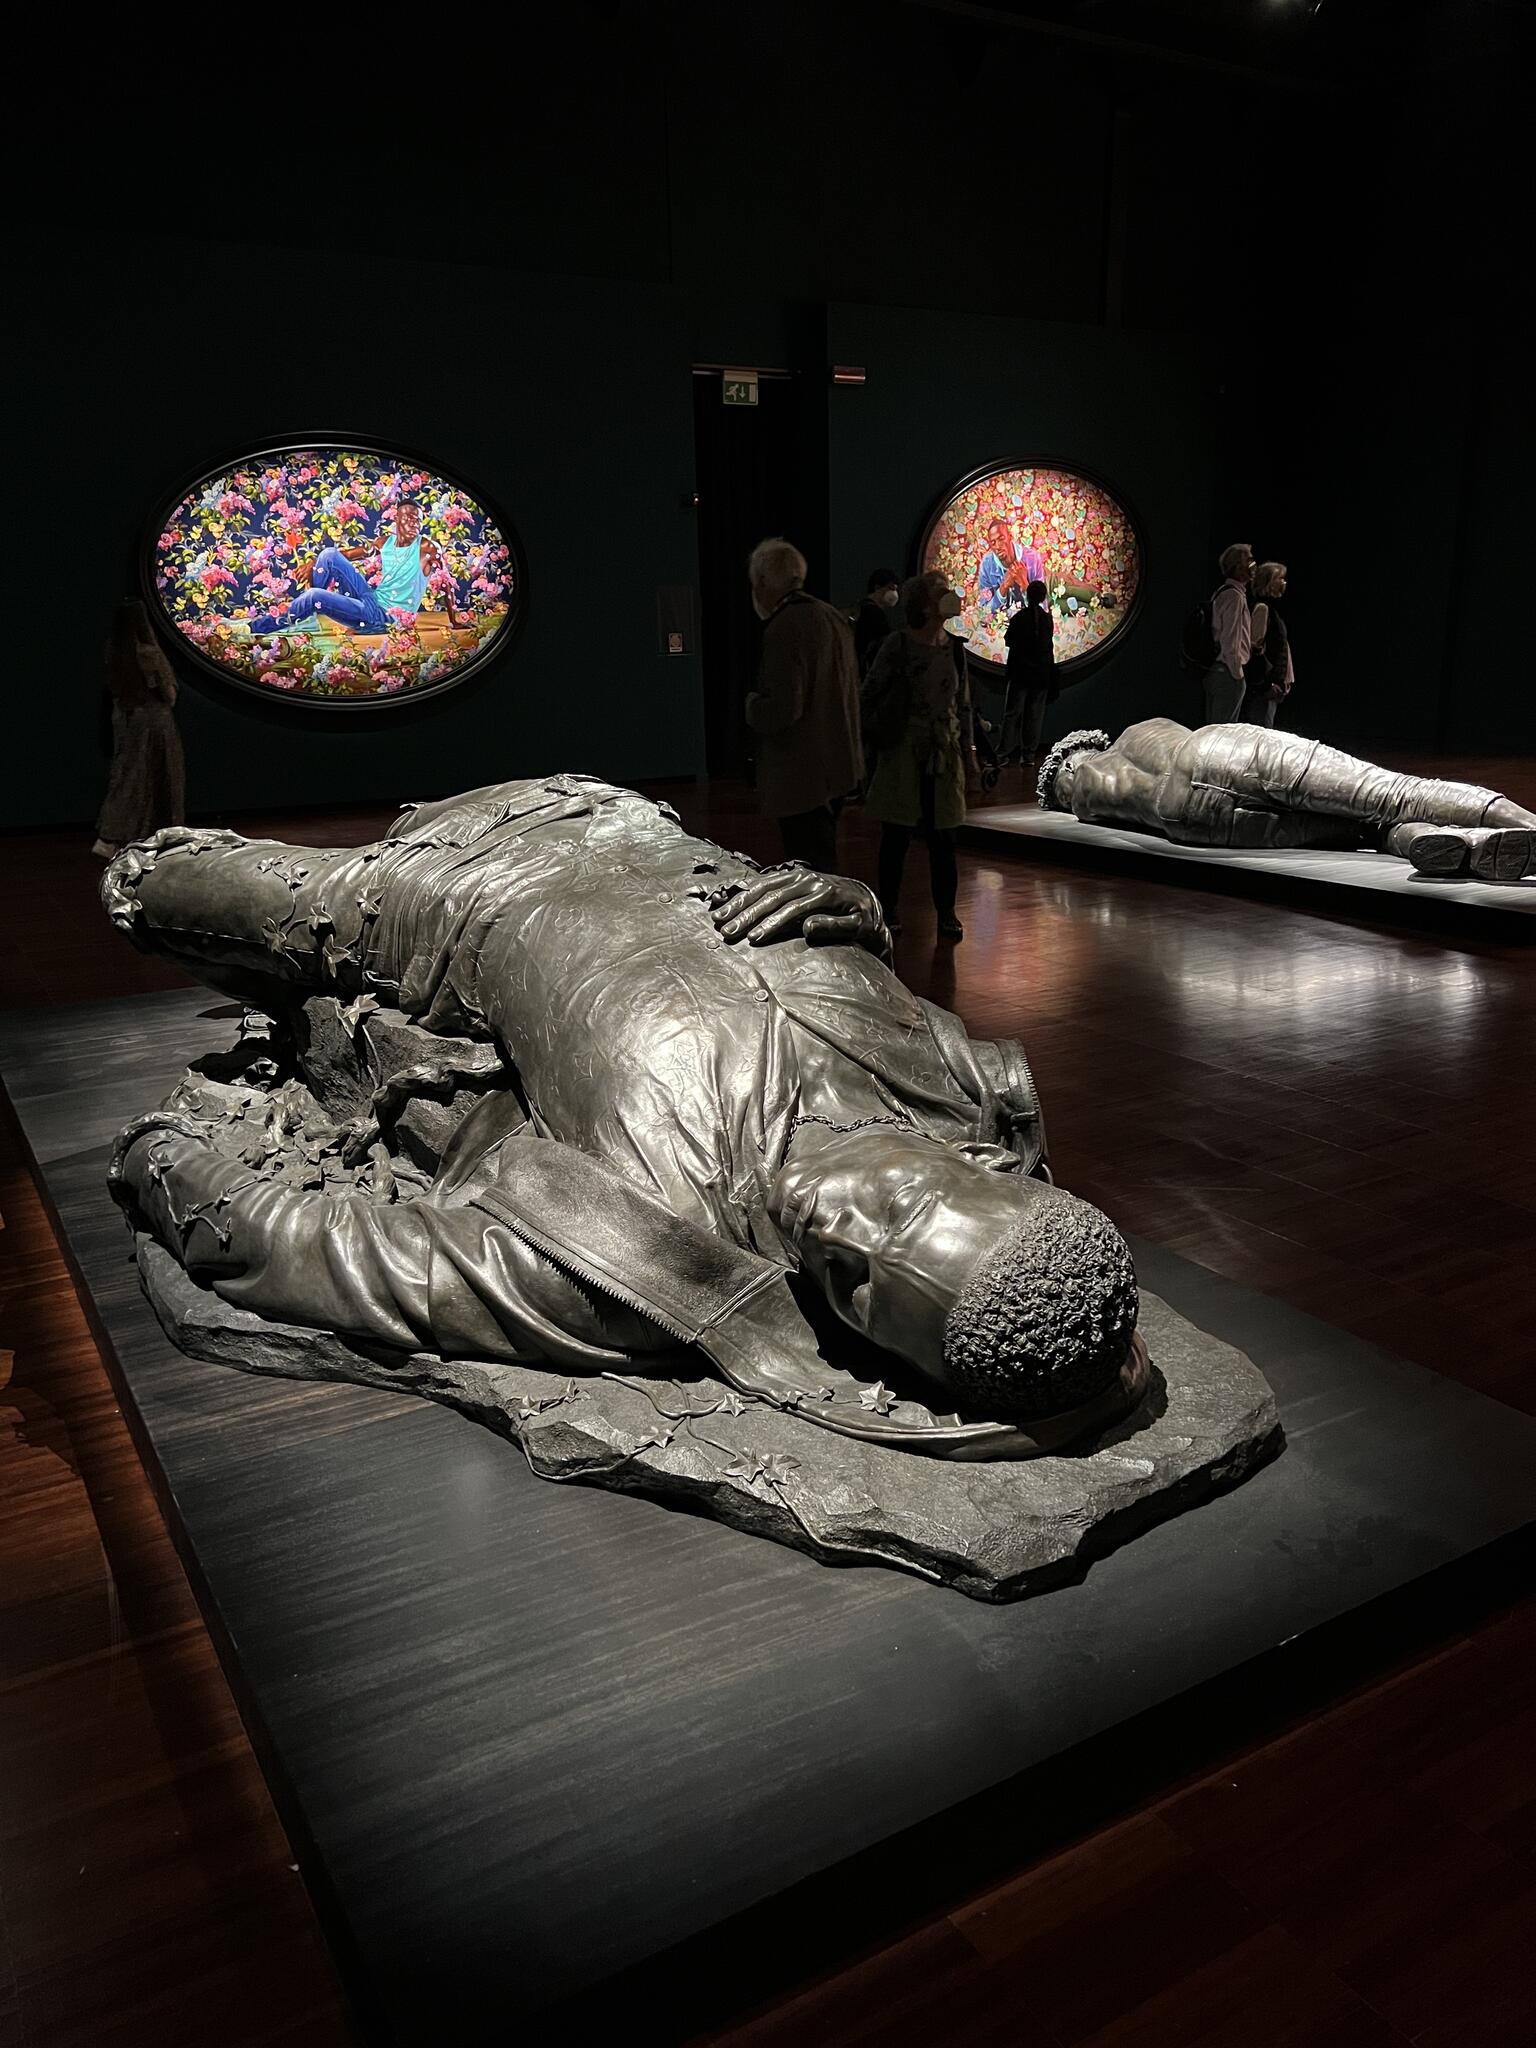 A sculpture from Kehinde Wiley's "An Archeology of Silence", Venice, 2022. Photo courtesy of Elise Masotti.